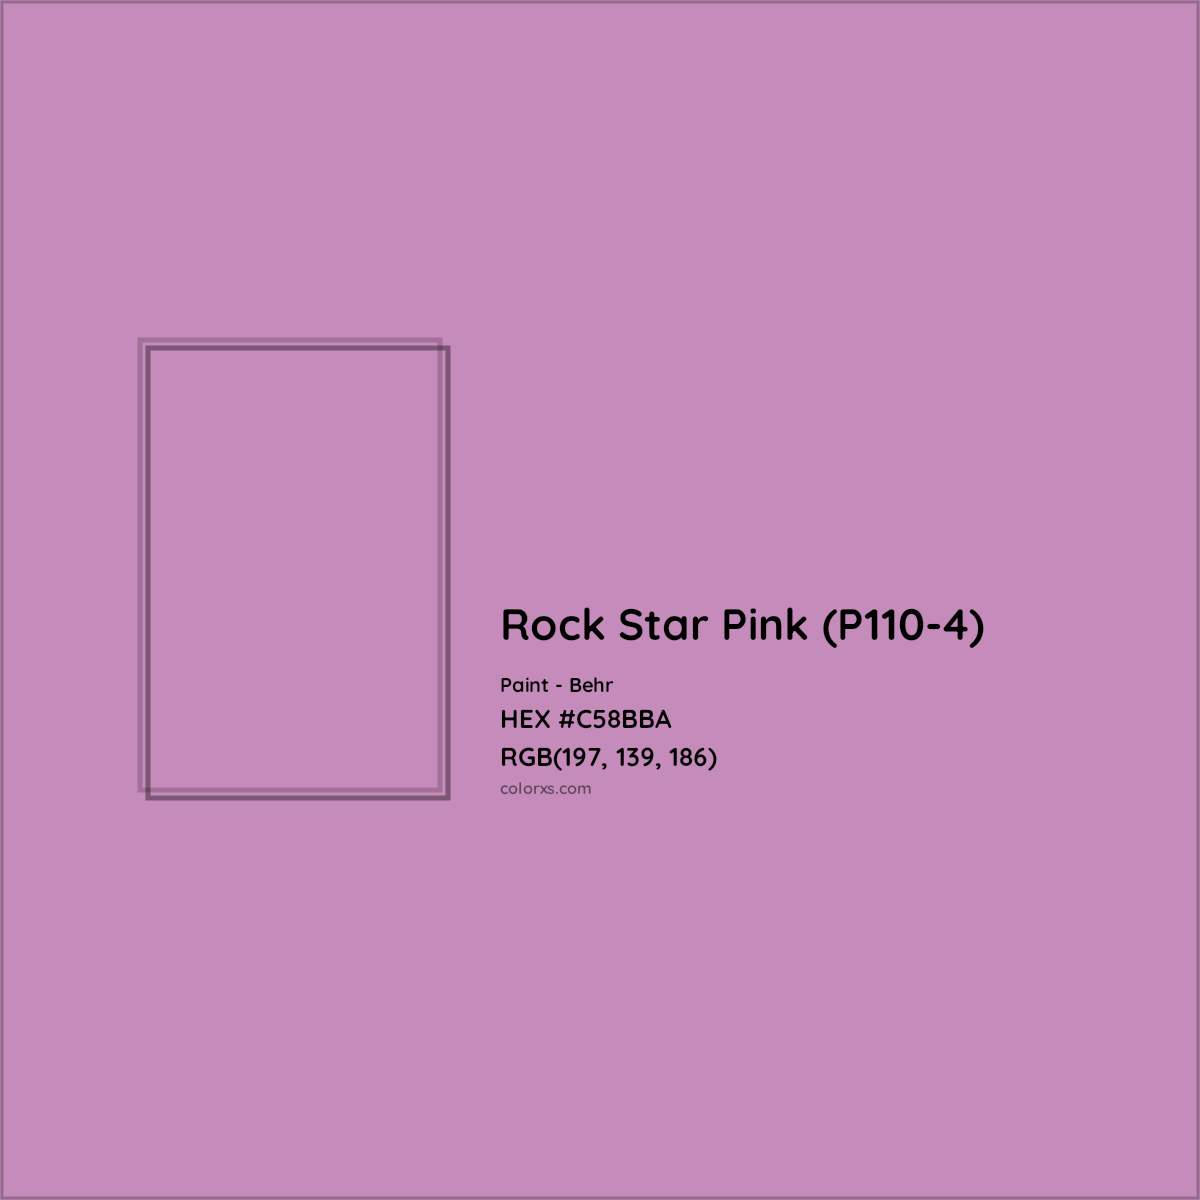 HEX #C58BBA Rock Star Pink (P110-4) Paint Behr - Color Code